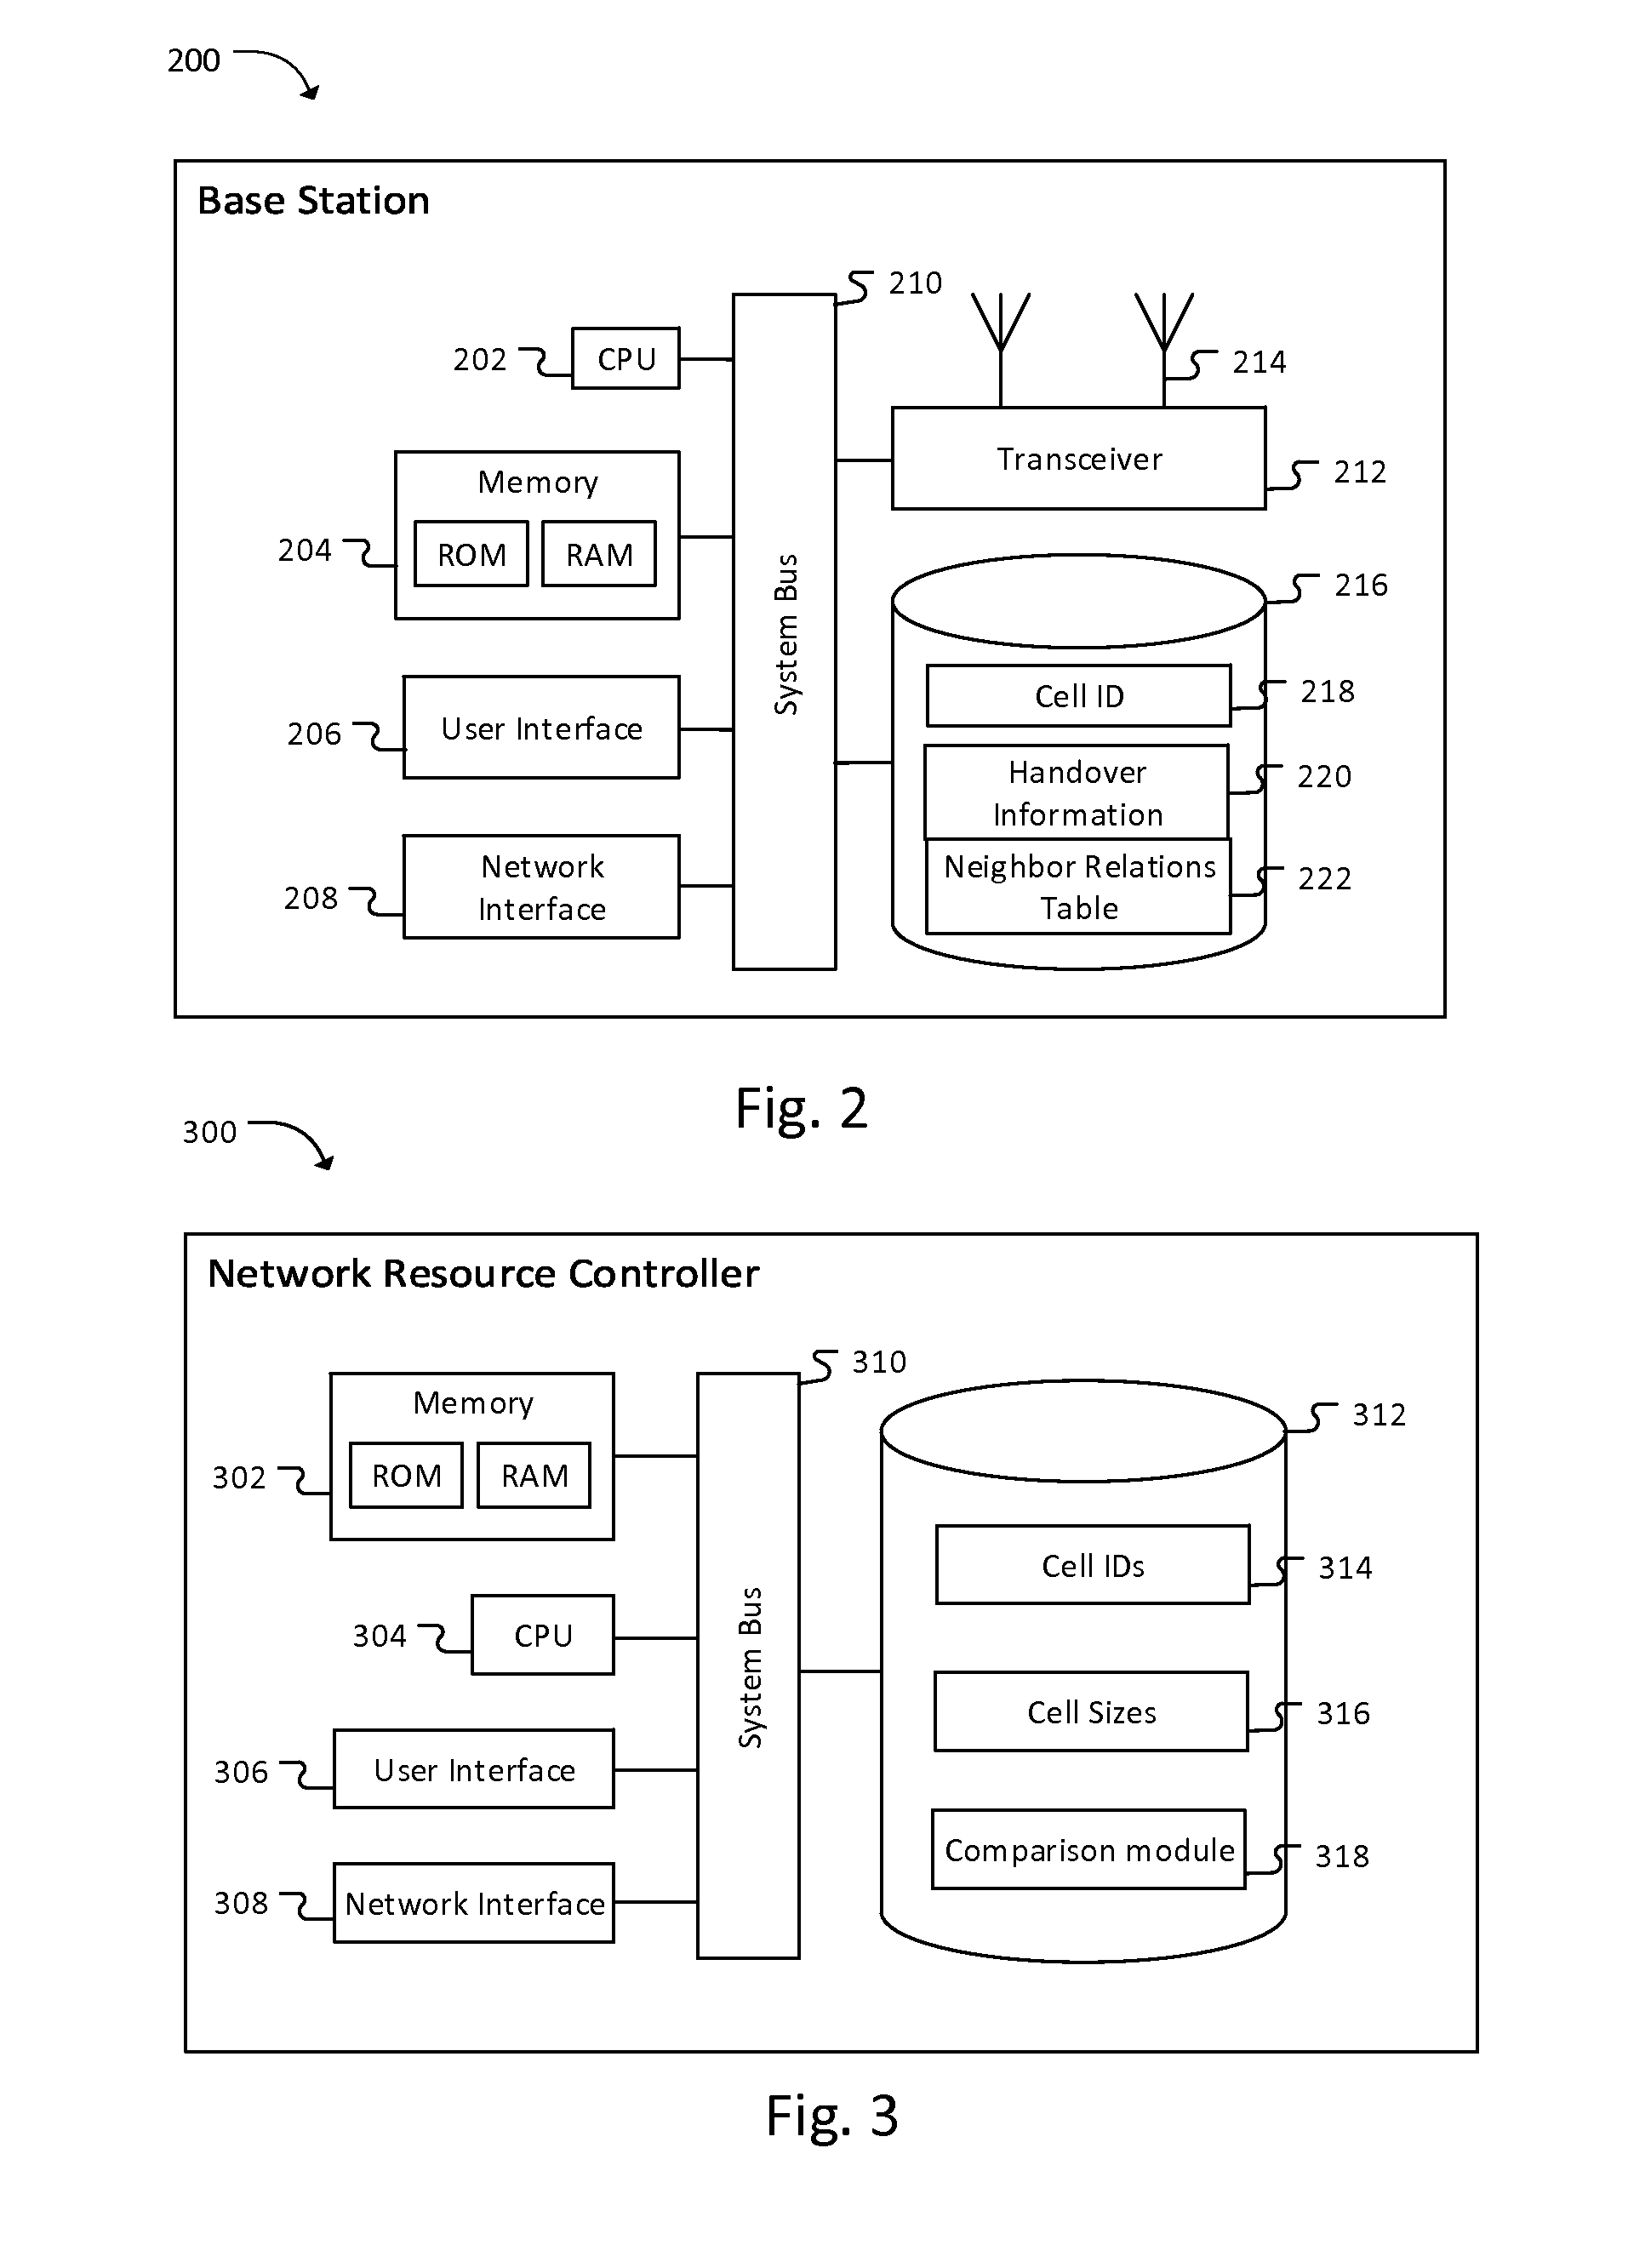 Method and system for automatic neighbor relations in multi-vendor heterogeneous network